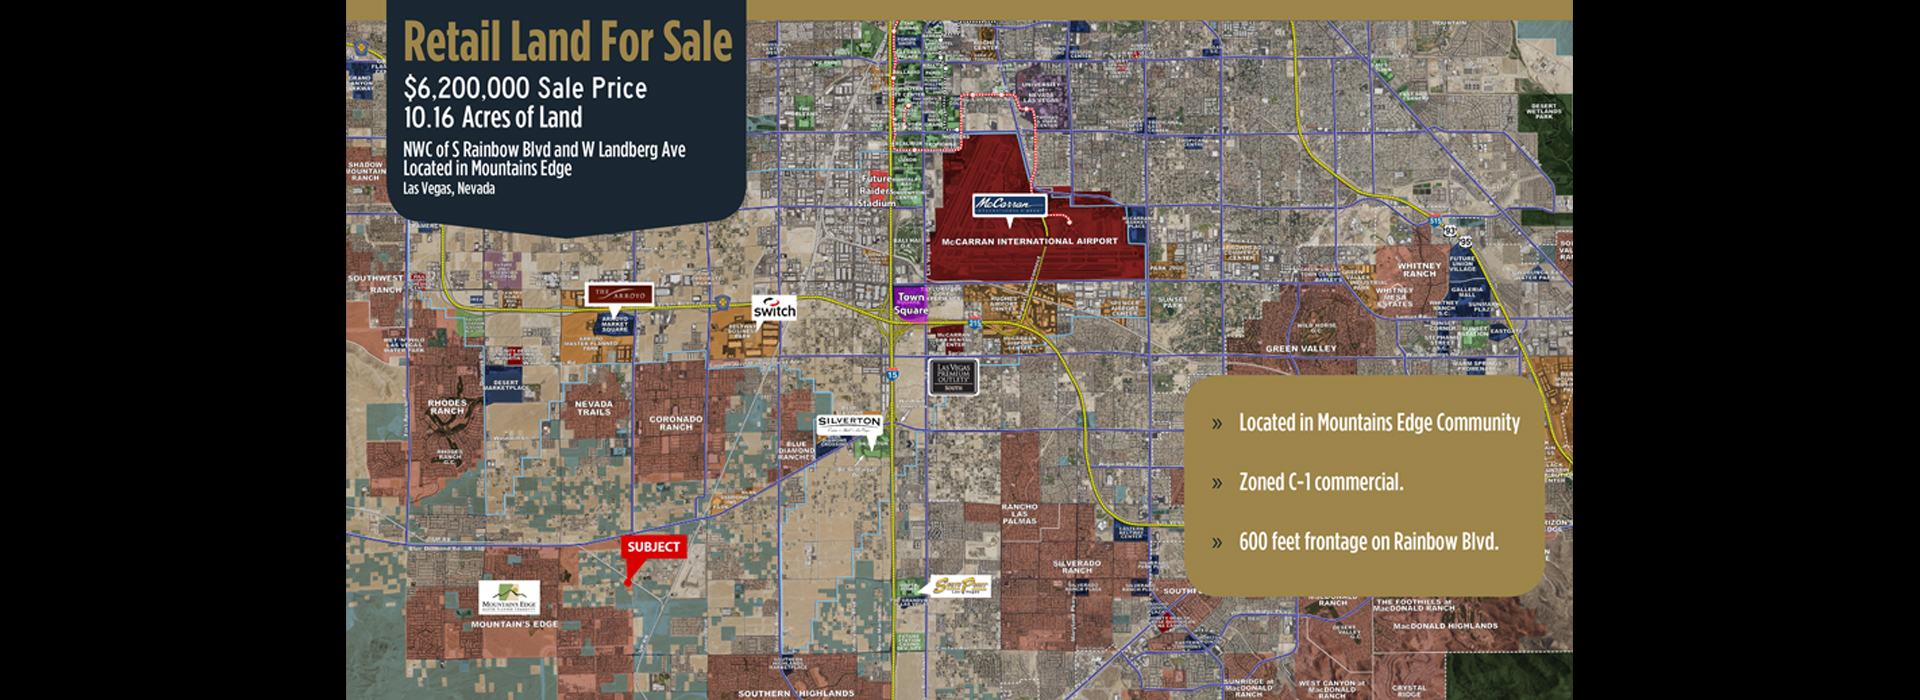 <small>RETAIL LAND FOR SALE 10.16 ACRES OF LAND</small>S. RAINBOW BLVD W. LANDBERG AVE.